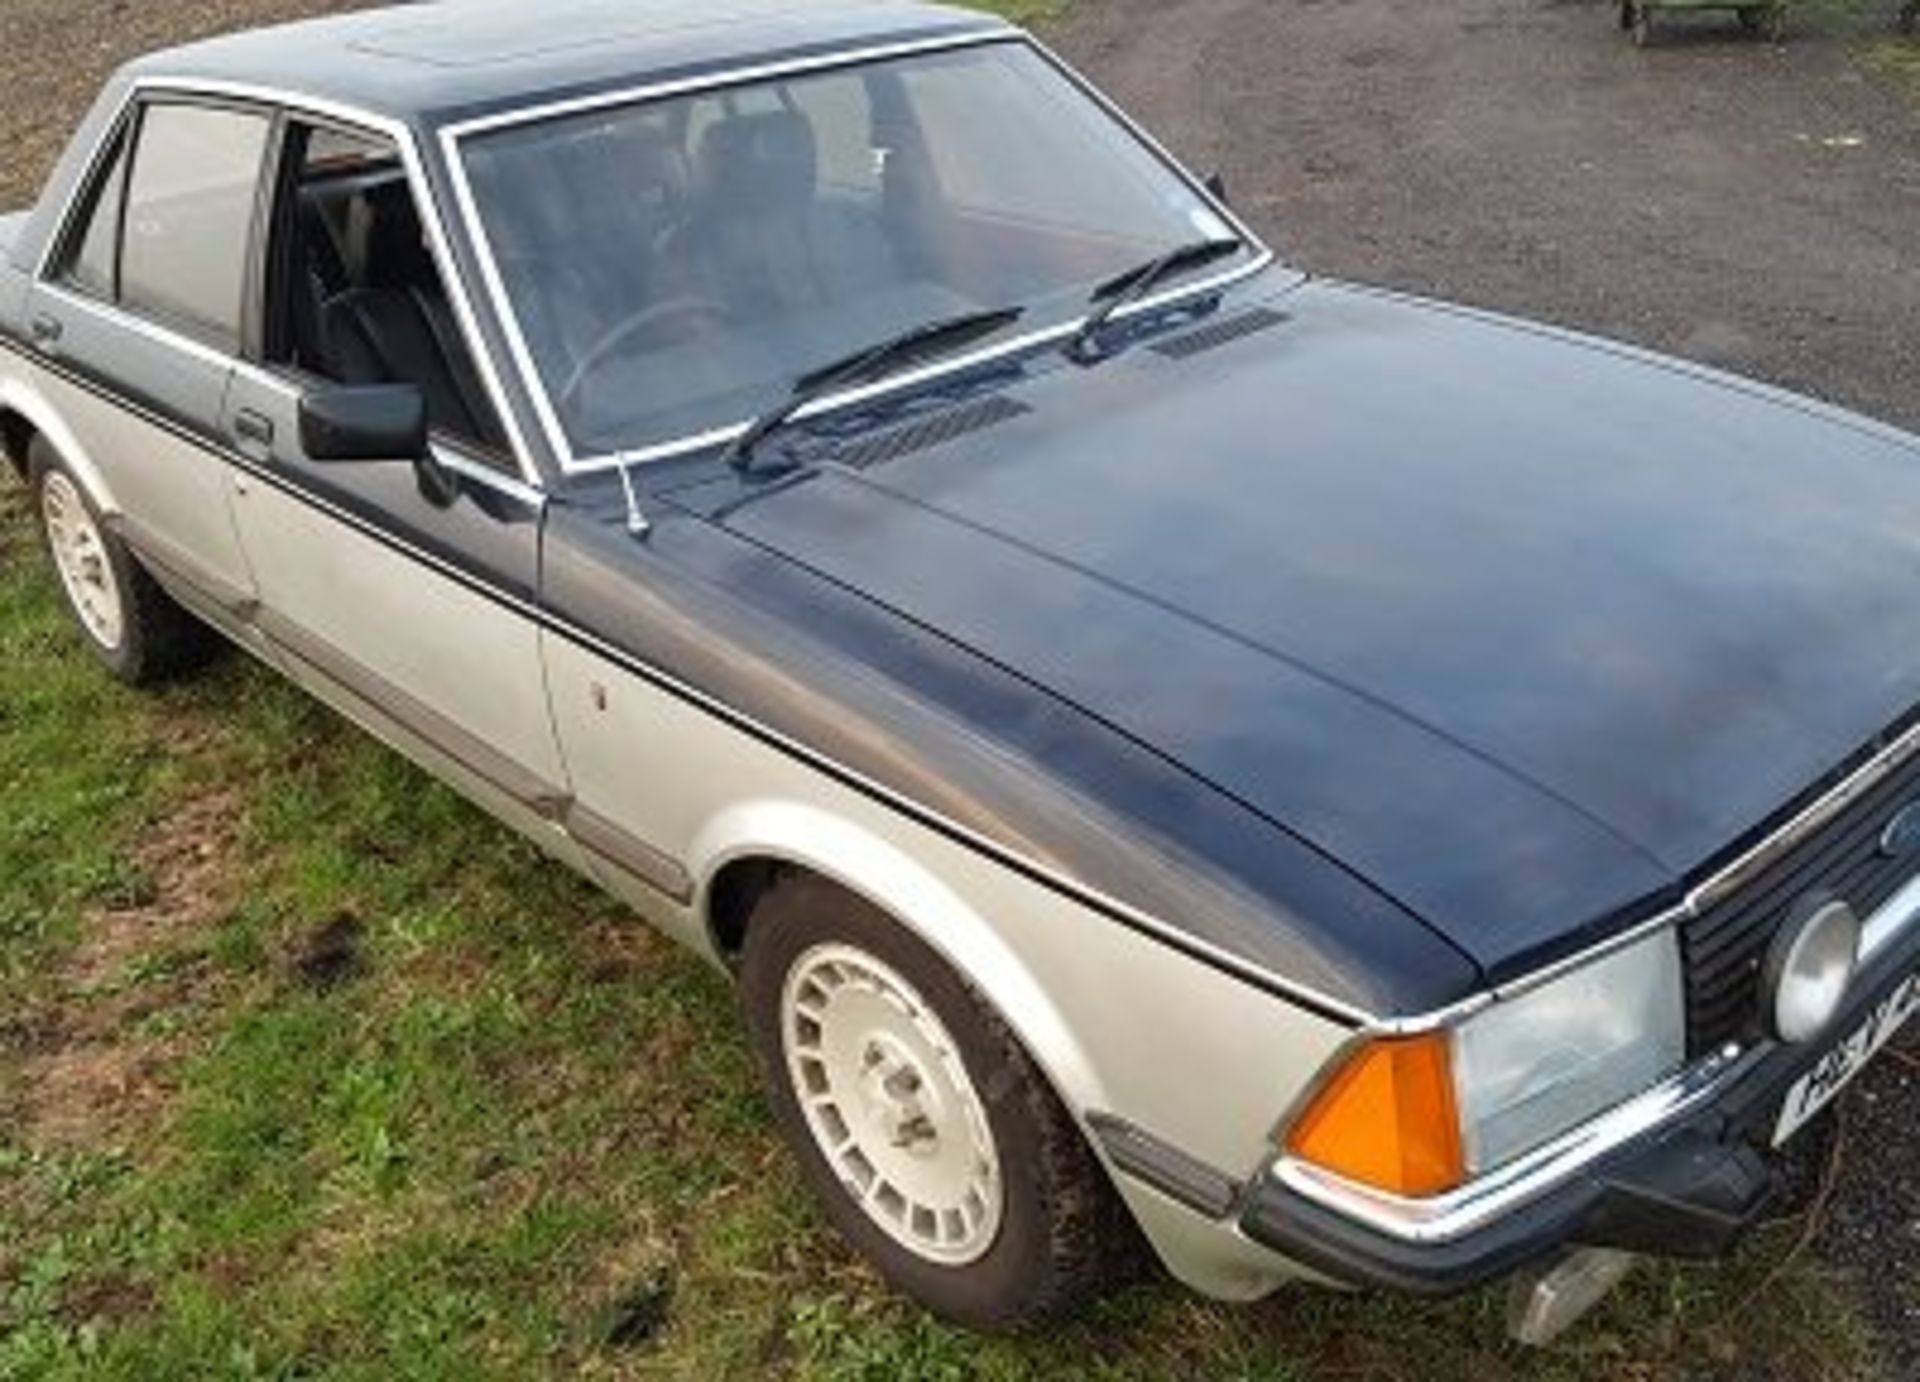 Ford Granada 2.8 Ghia “Sapphire” 1979 - We are pleased to say that the vendor of this rare of rare - Image 2 of 13